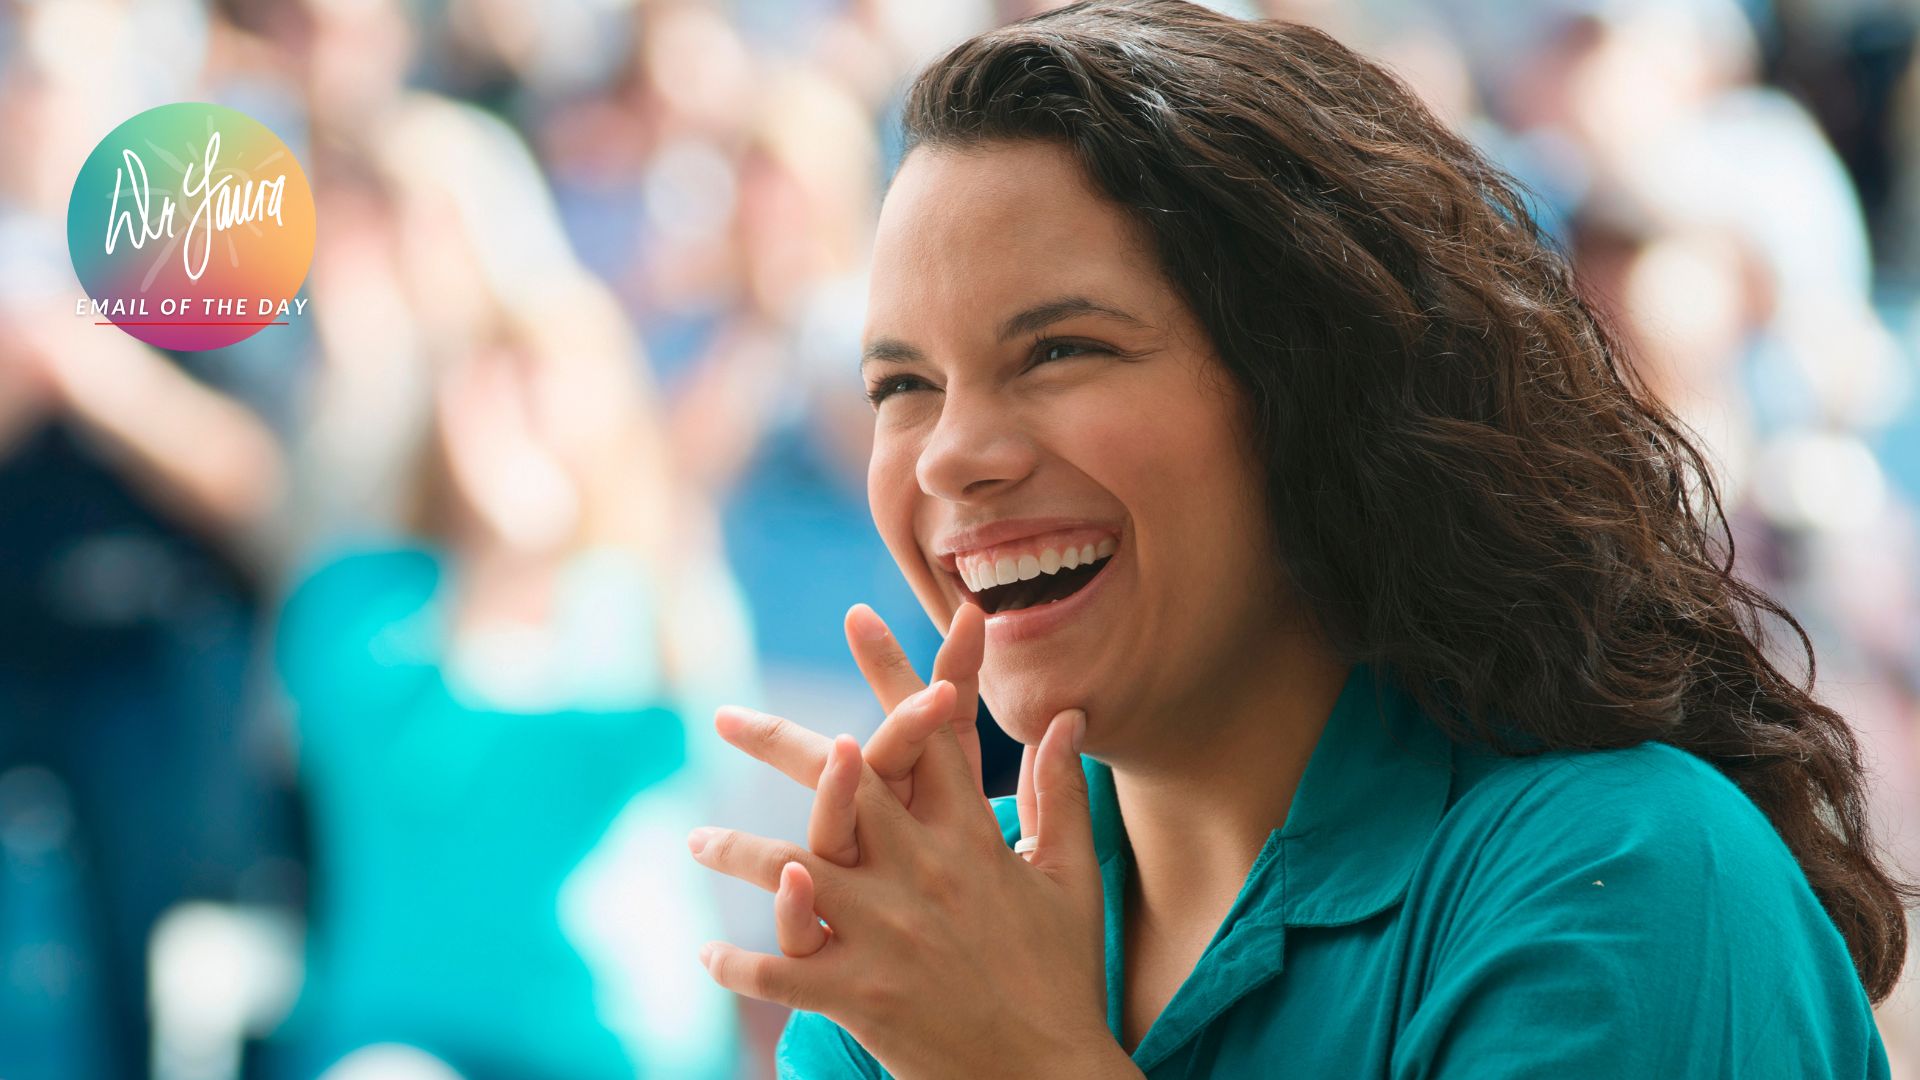 Woman in green-collared shirt smiles while clasping her hands